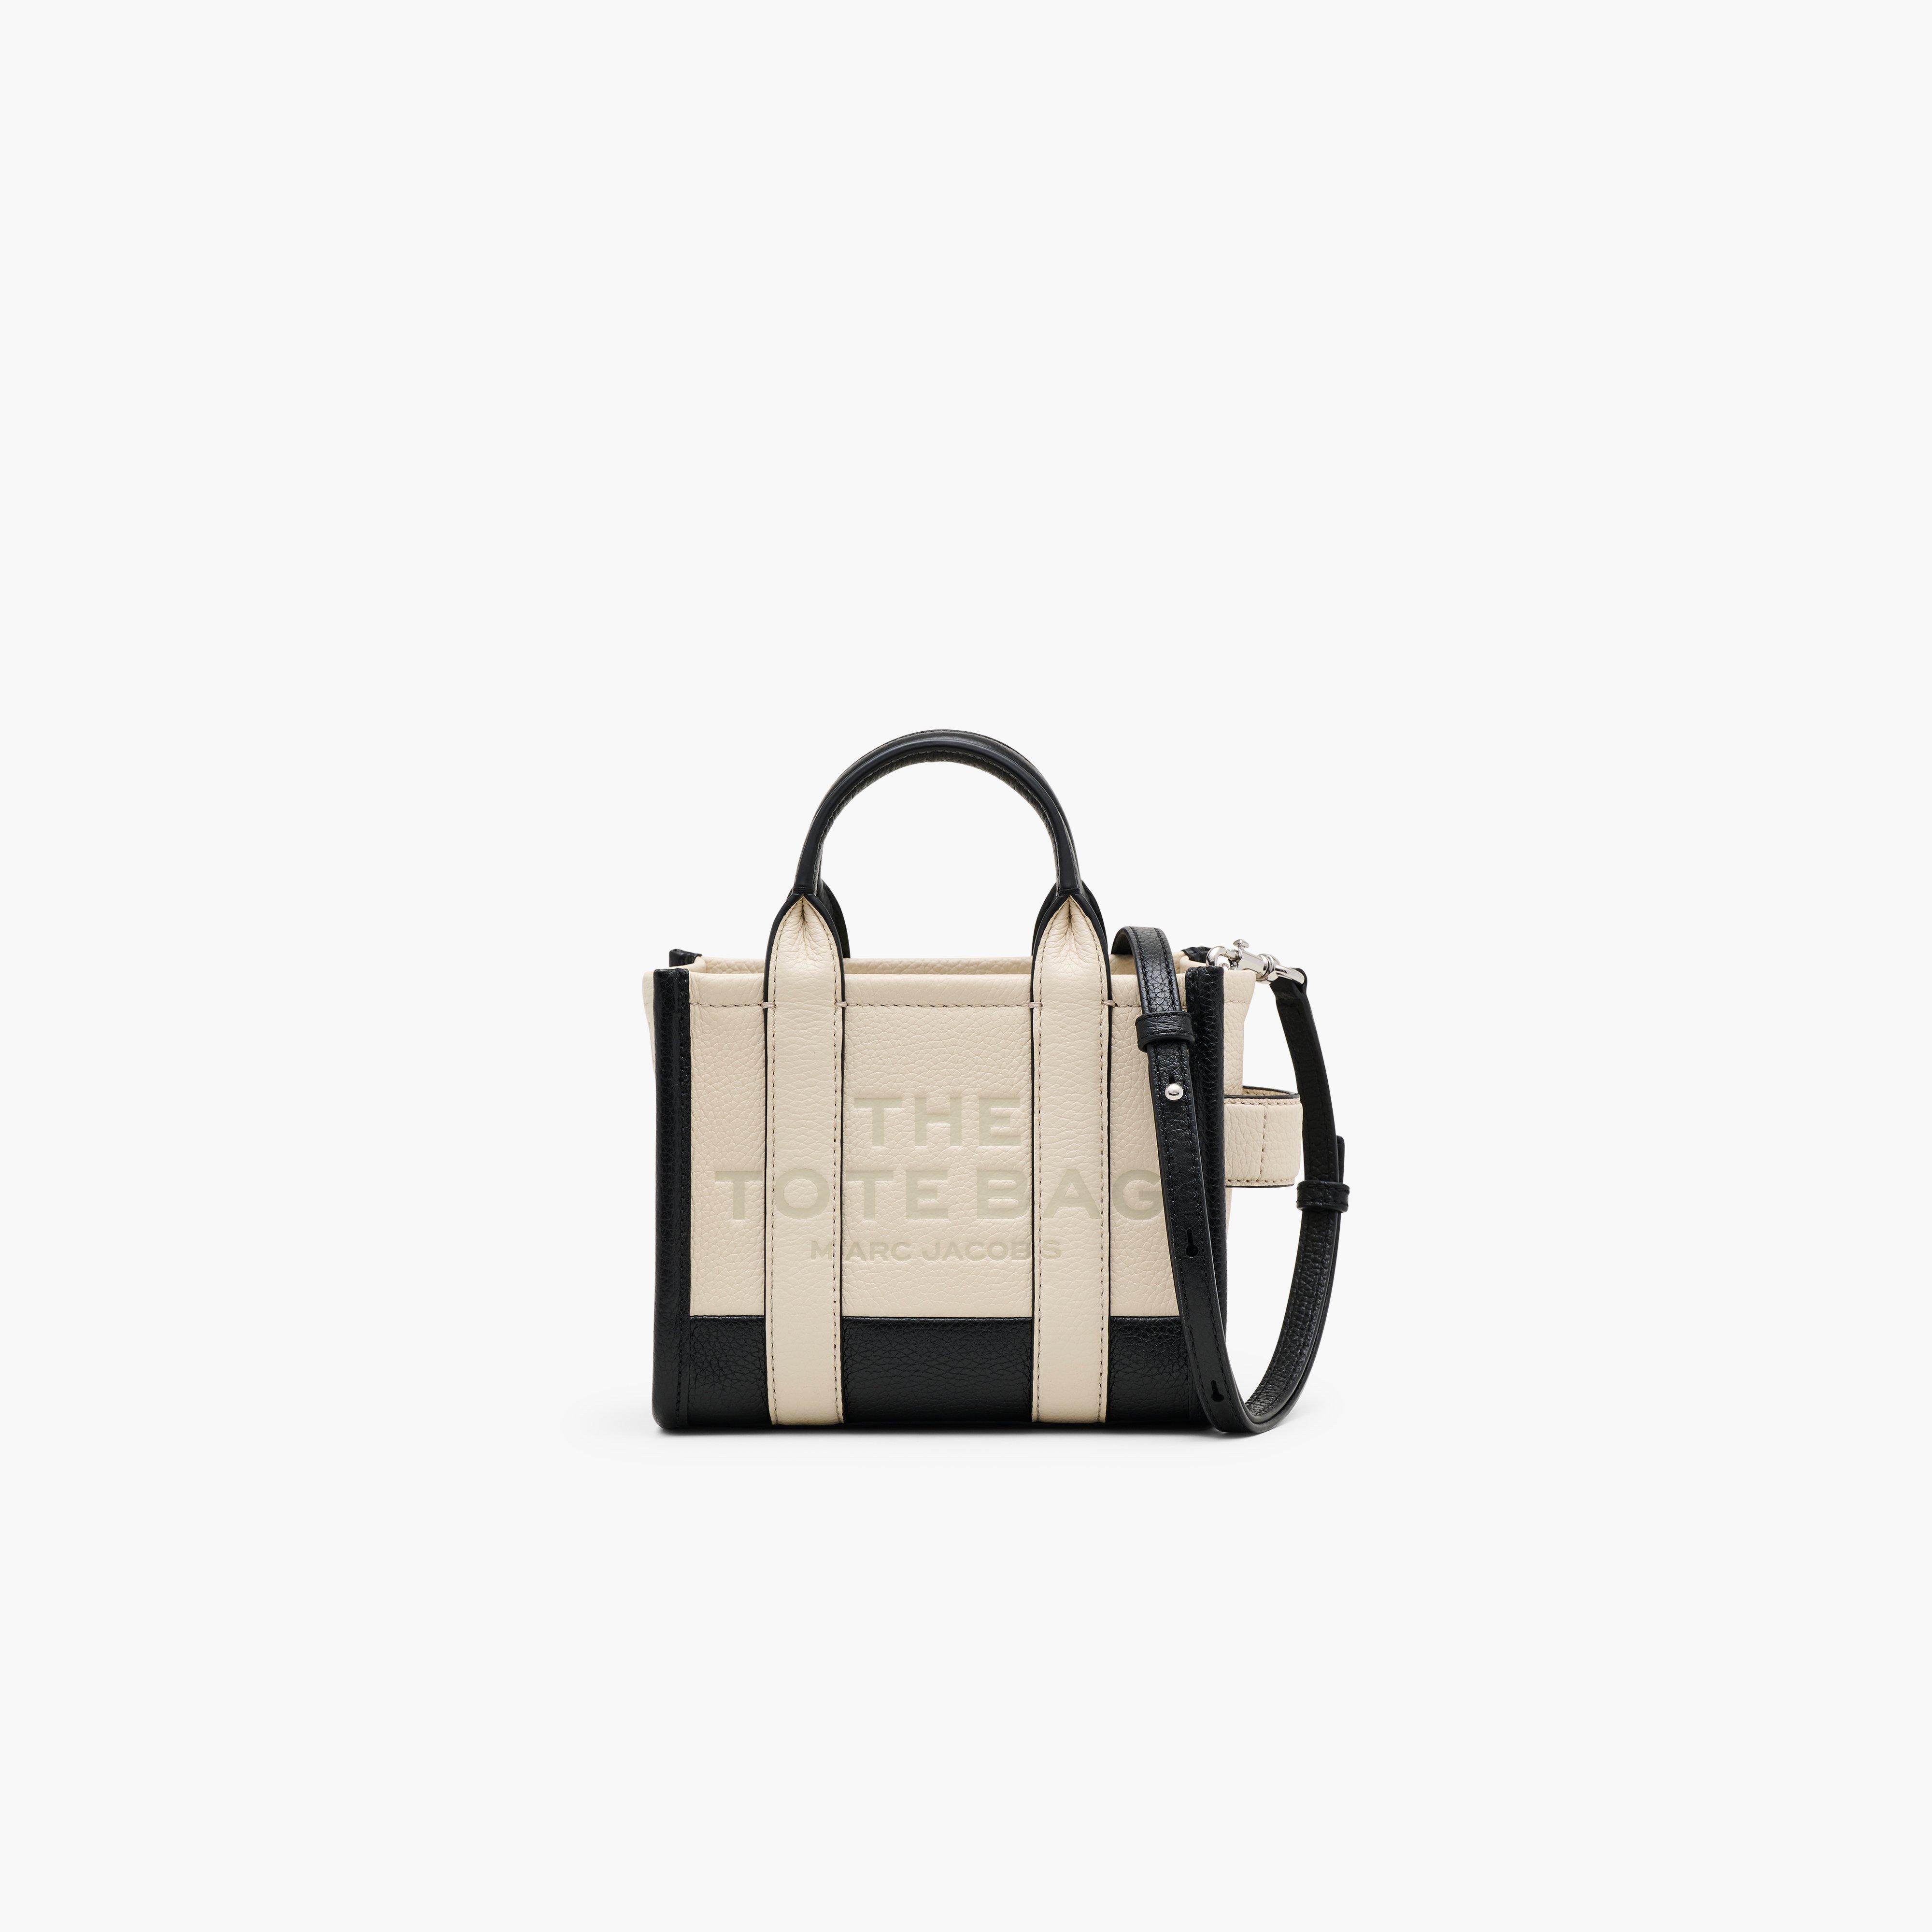 Marc by Marc jacobs The Colorblock Mini Tote Bag,IVORY MULTI